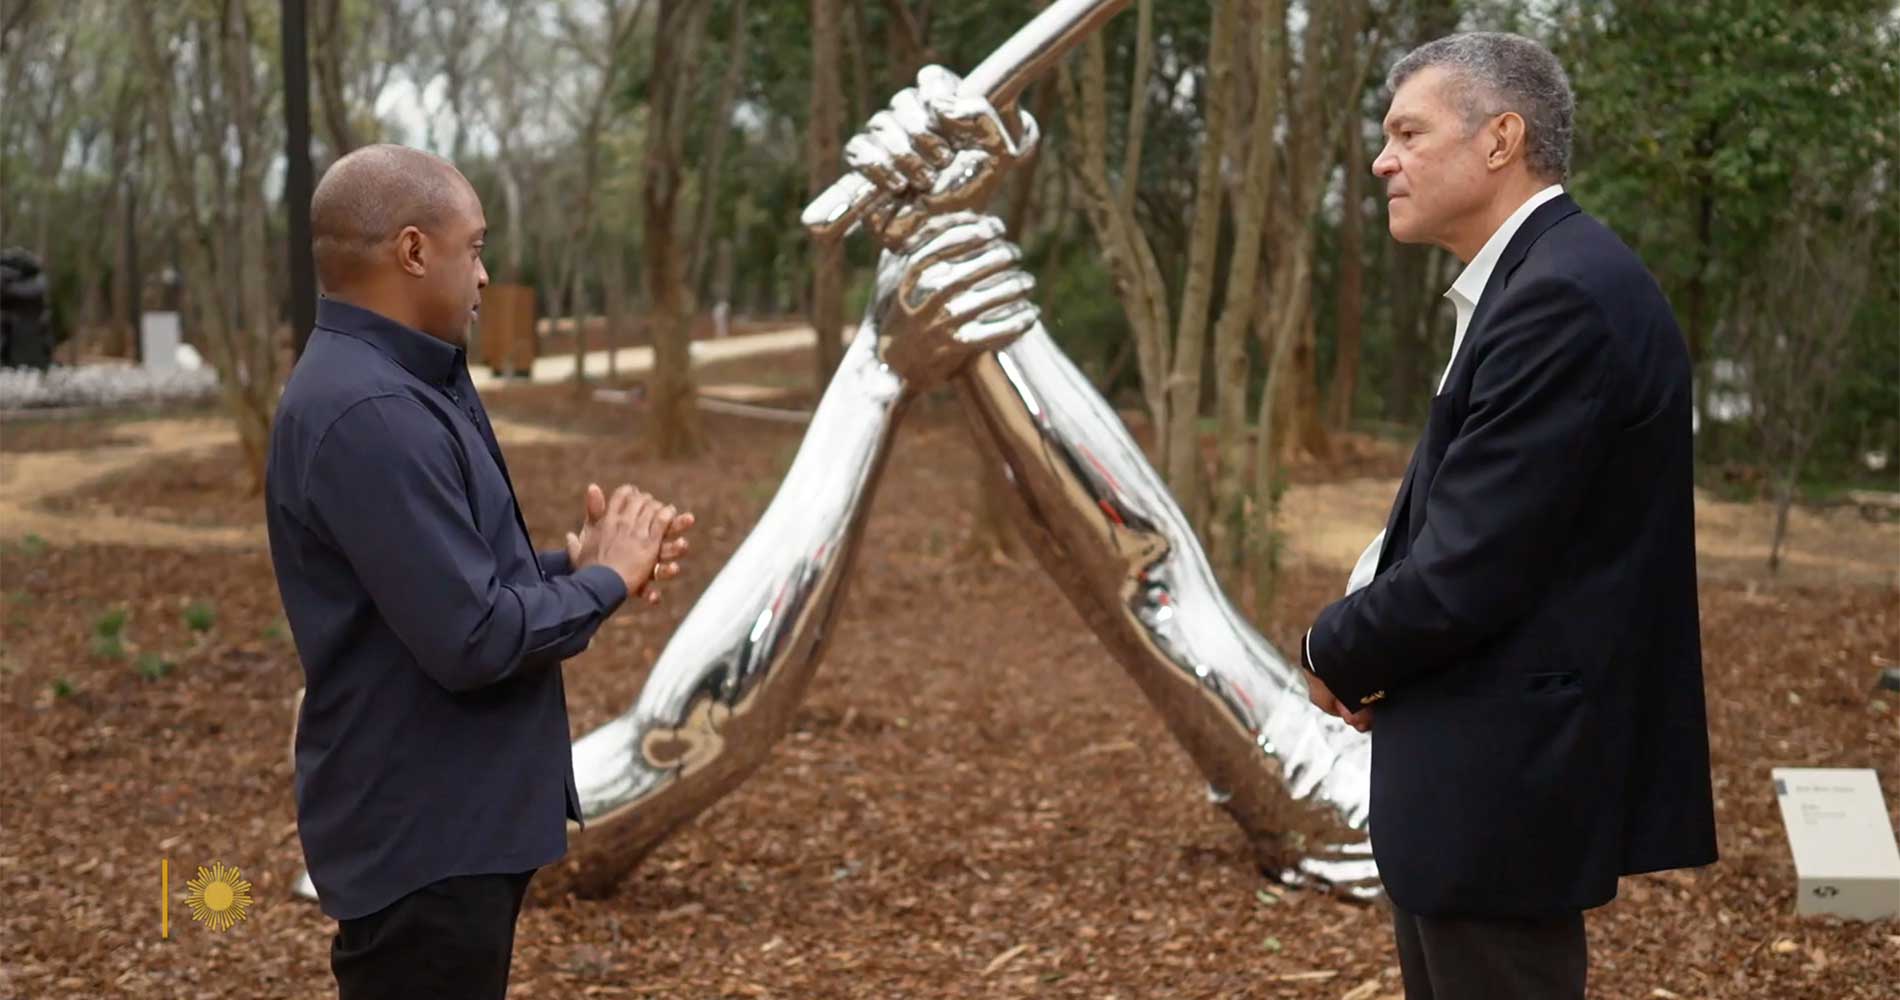 Excitement Grows for EJI's New Freedom Monument Sculpture Park, Opening Soon